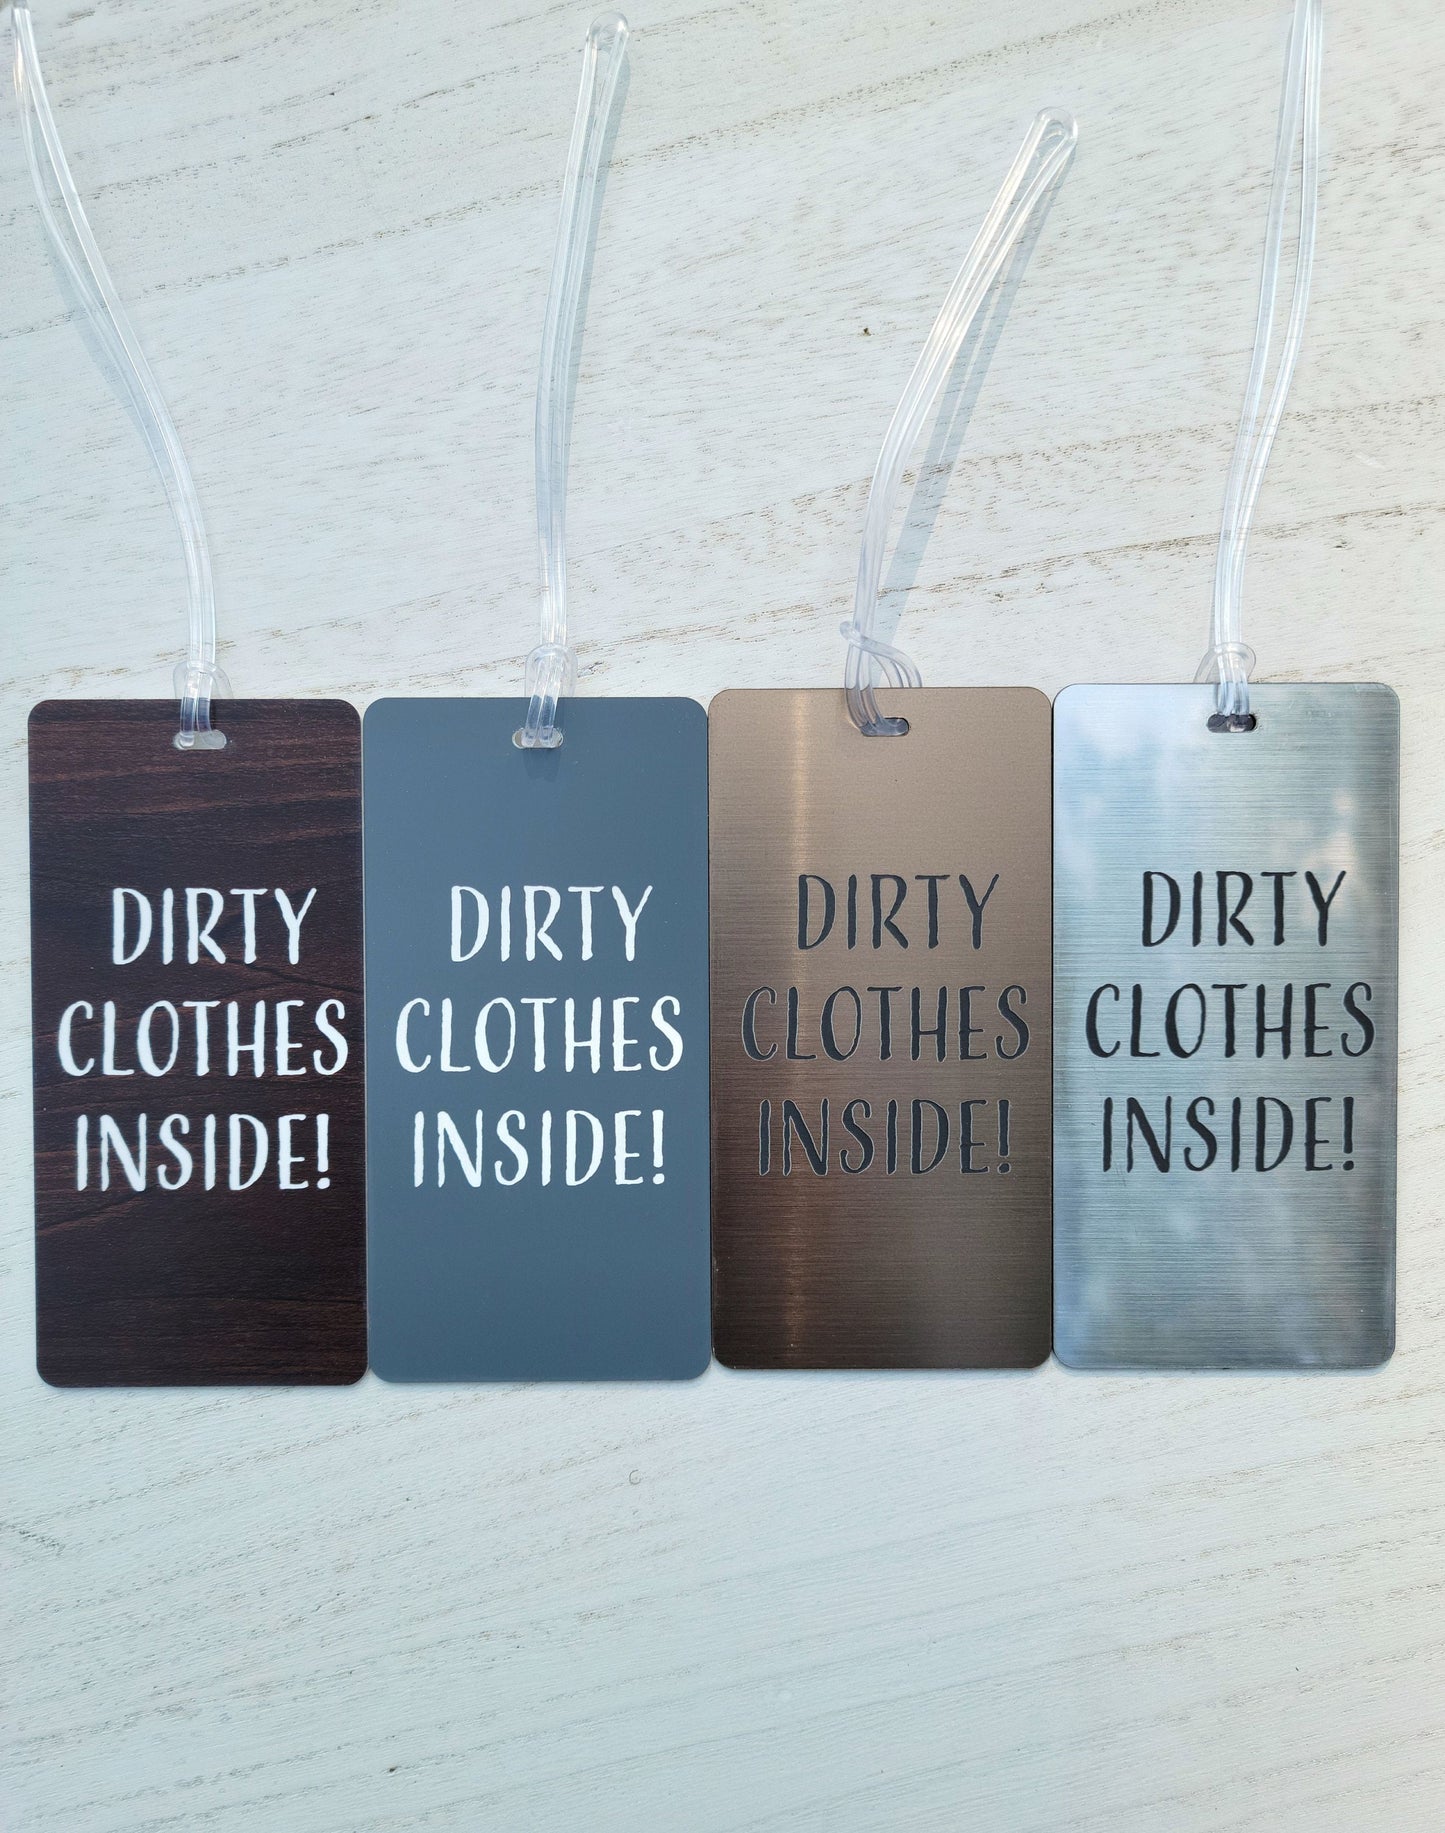 Dirty Clothes Inside Luggage Tag